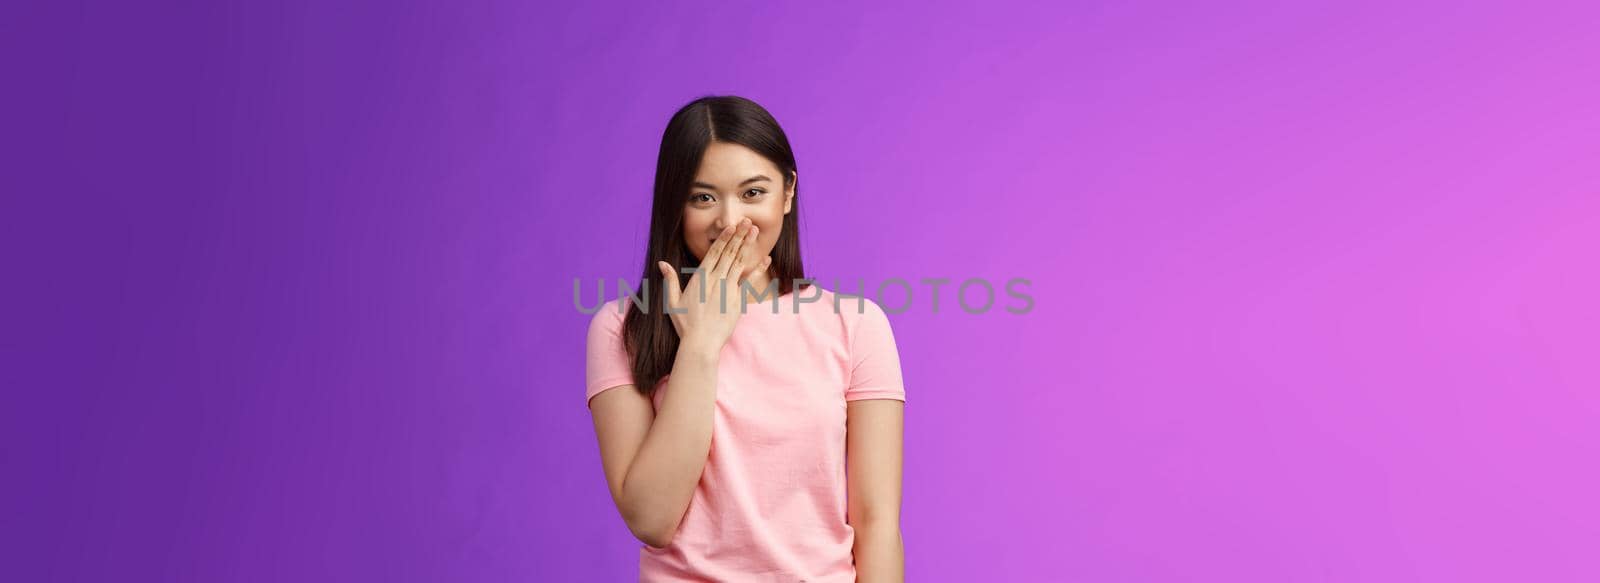 Timid cute stylish modern asian woman giggling, gossiping, cover smiling lips, laughing out loud joyfully, look camera entertained, fool around, spread funny rumors, stand purple background.